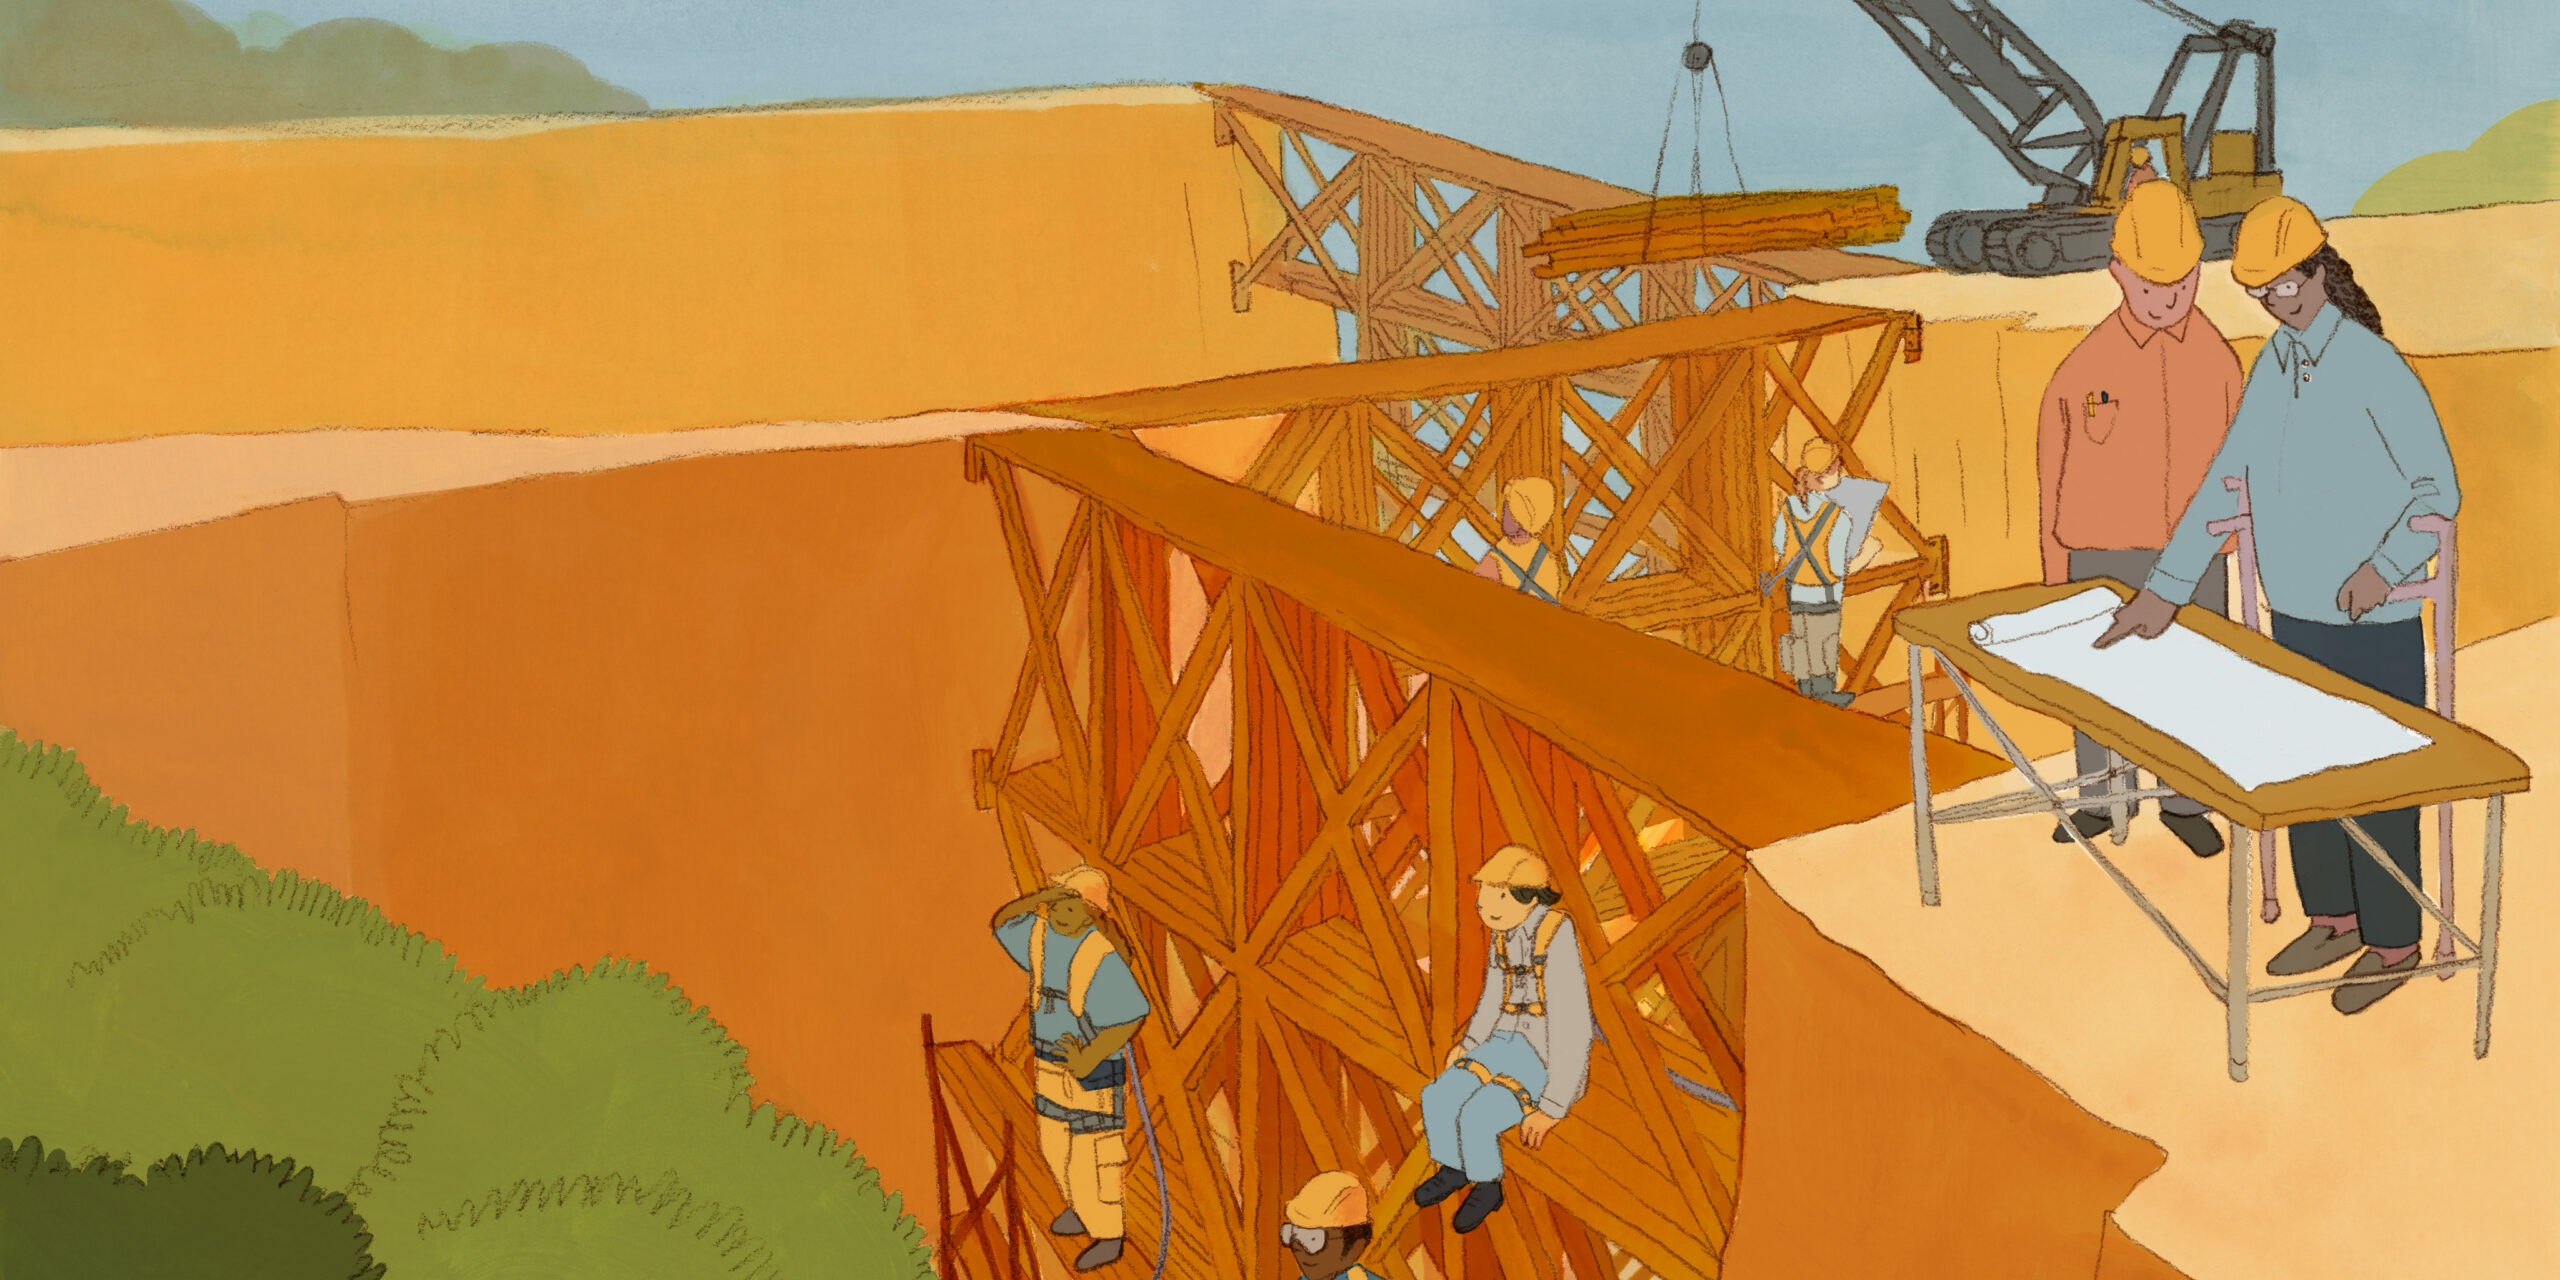 Illustration of workers constructing a dam between two cliffs.